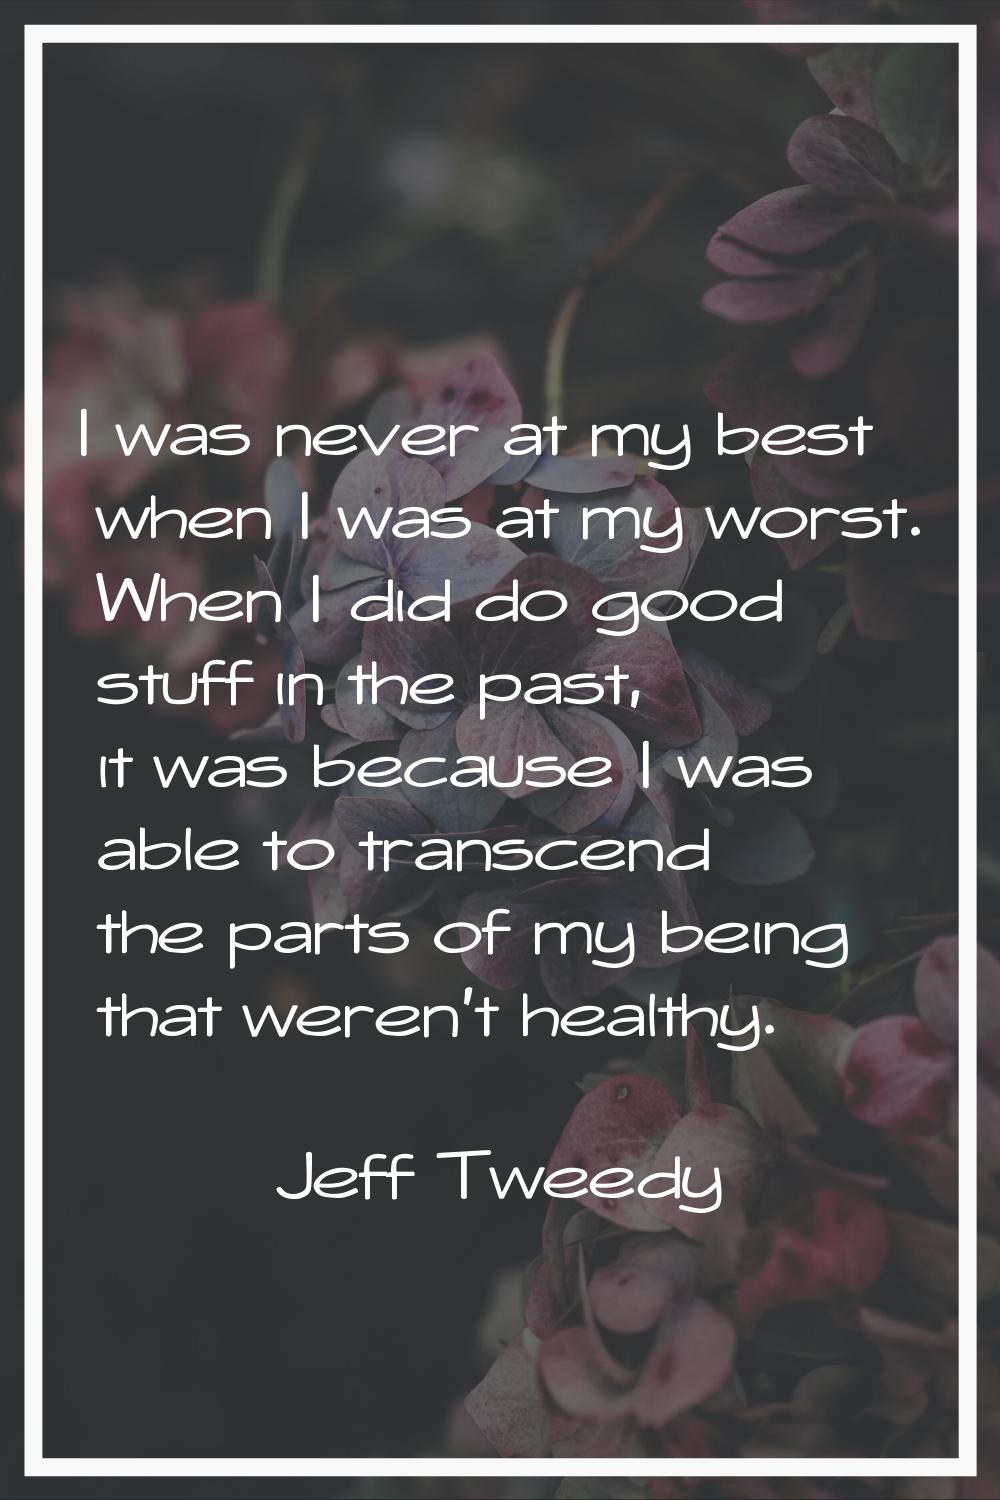 I was never at my best when I was at my worst. When I did do good stuff in the past, it was because